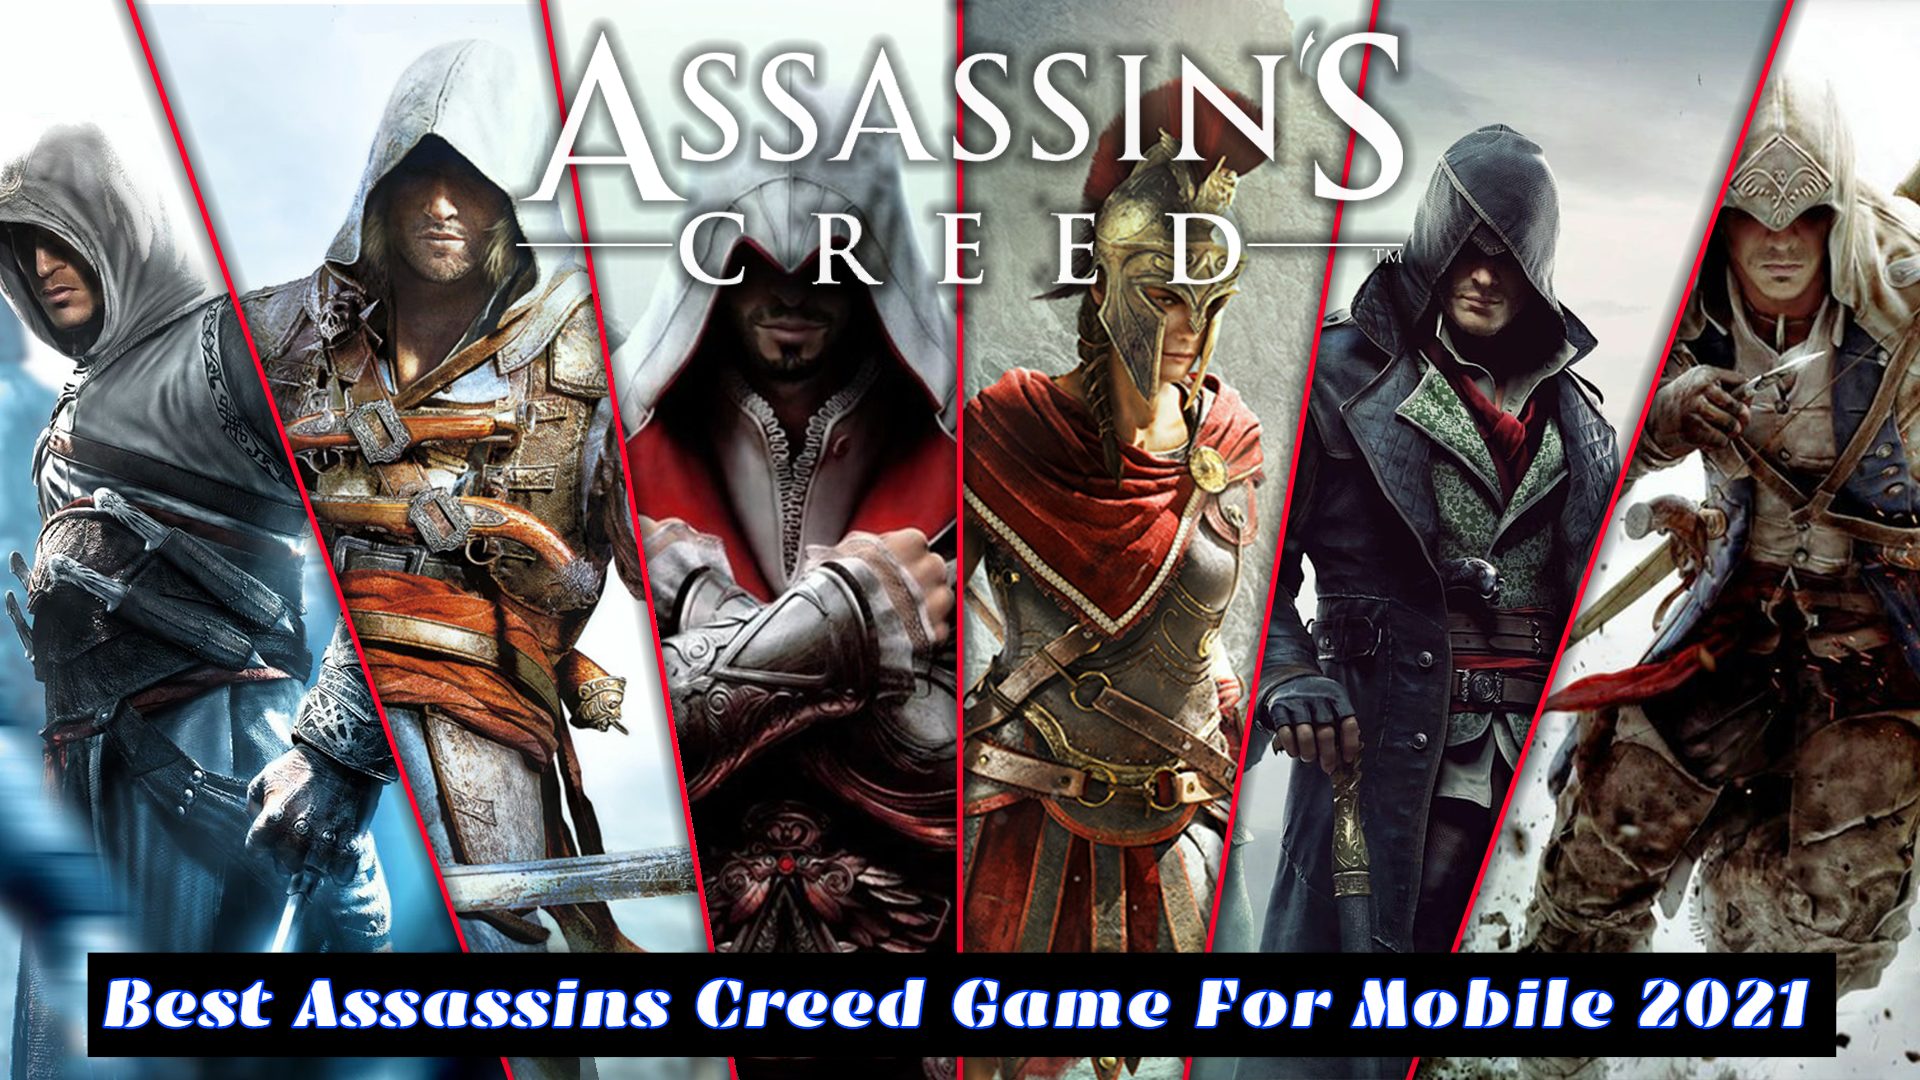 You are currently viewing Best Assassins Creed Game For Mobile 2021